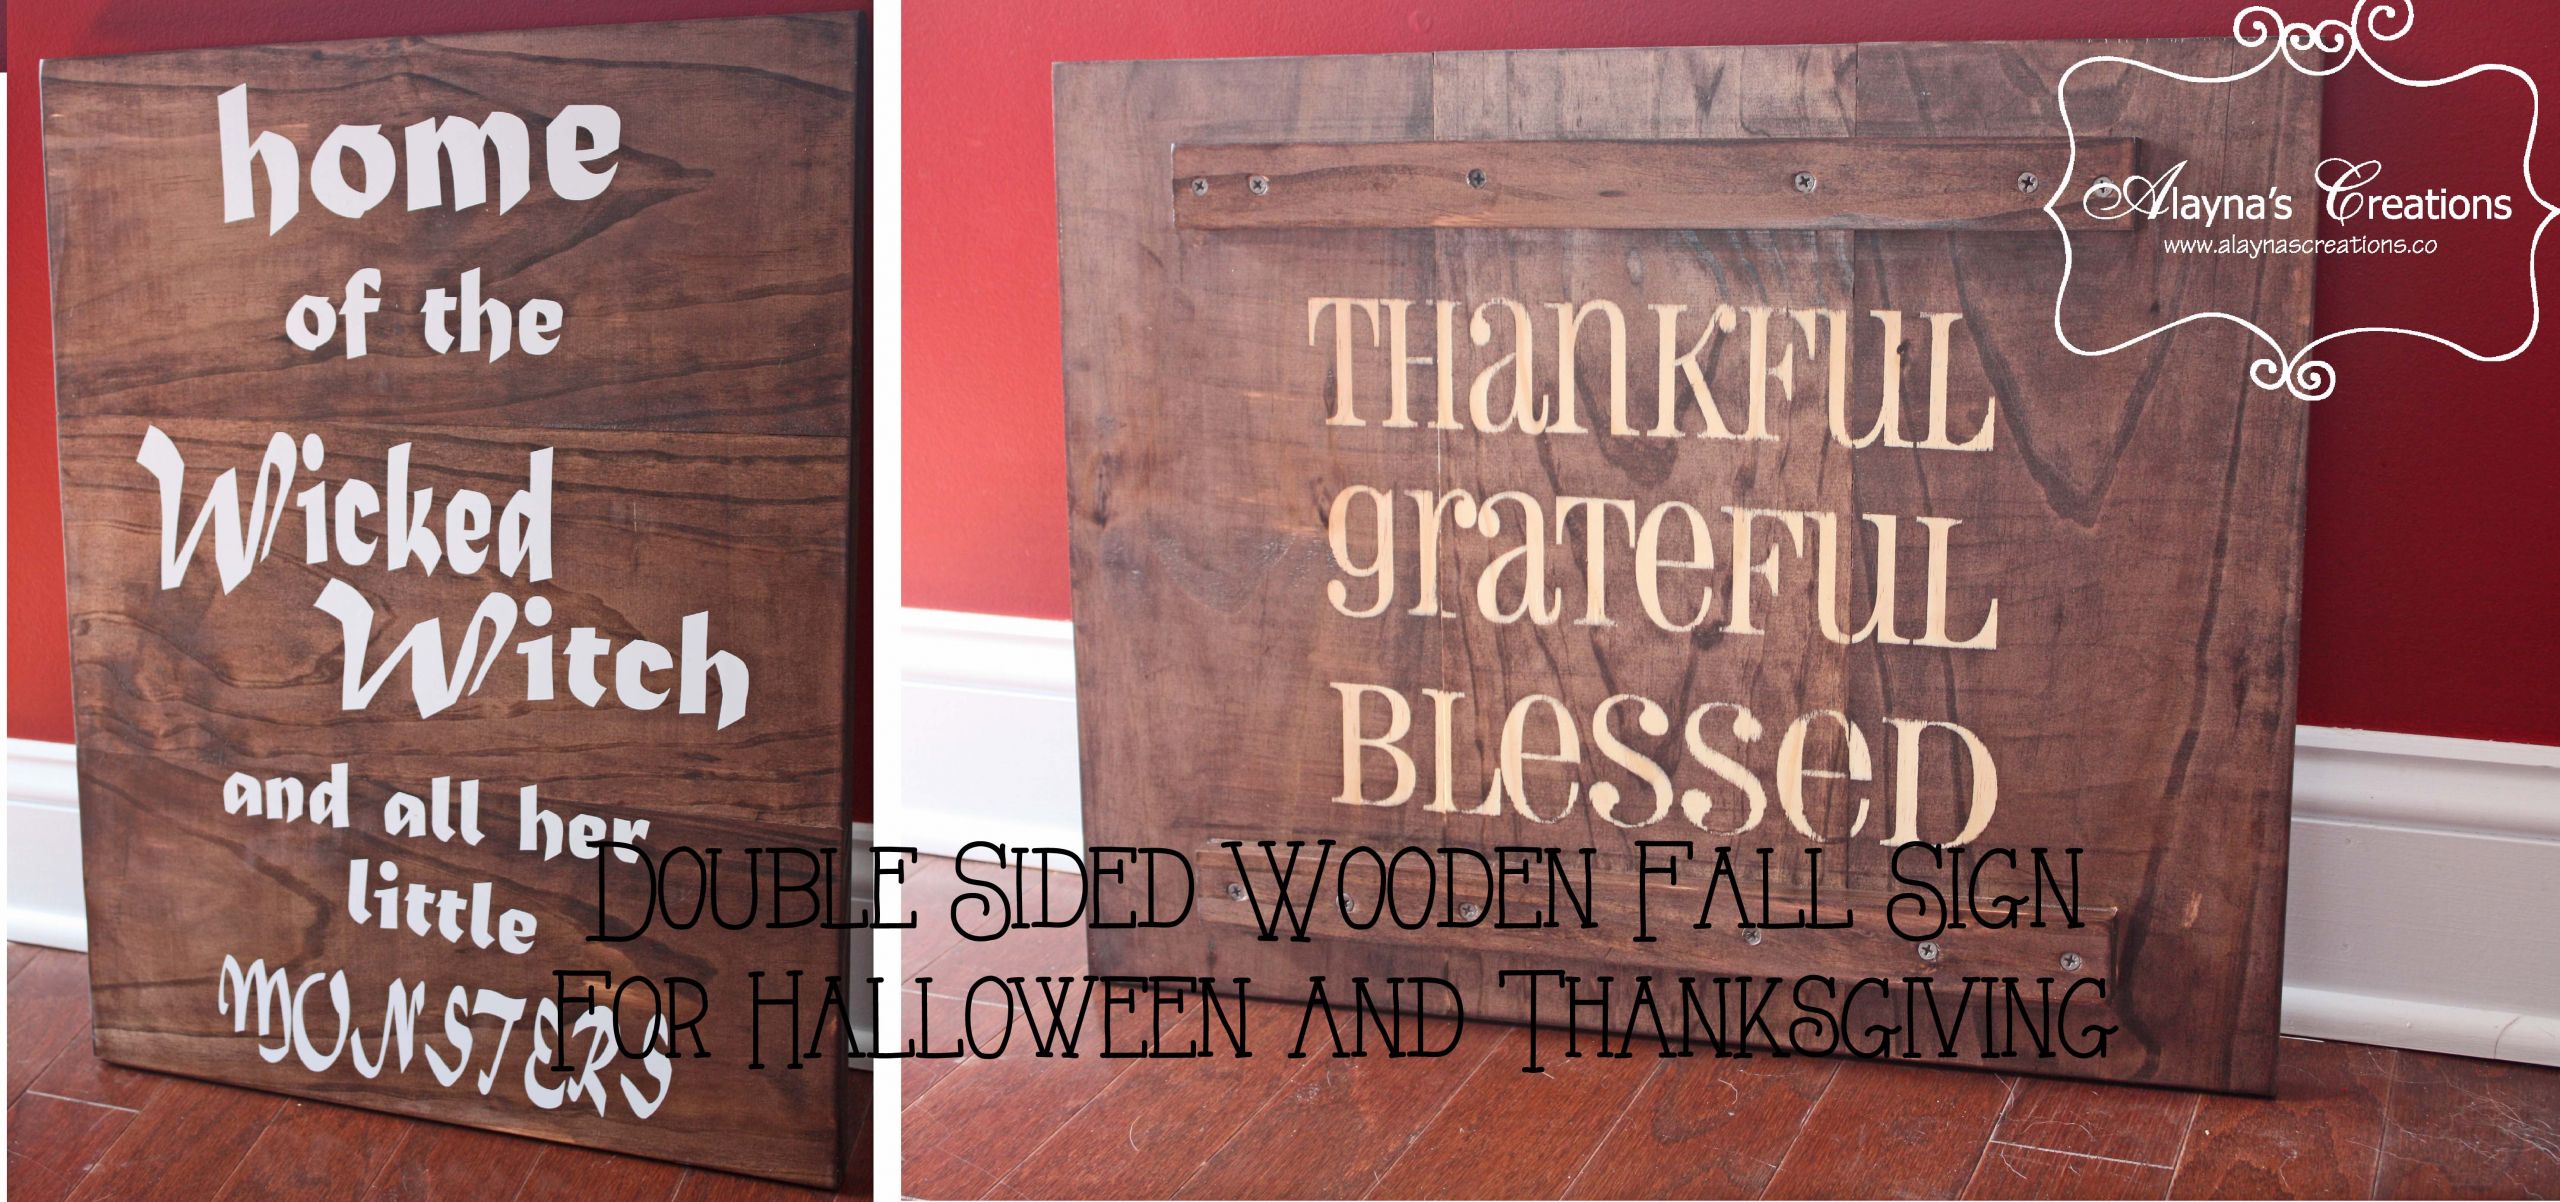 DIY Halloween Wood Signs
 DIY Wooden Sign for Fall – Double sided for Halloween and